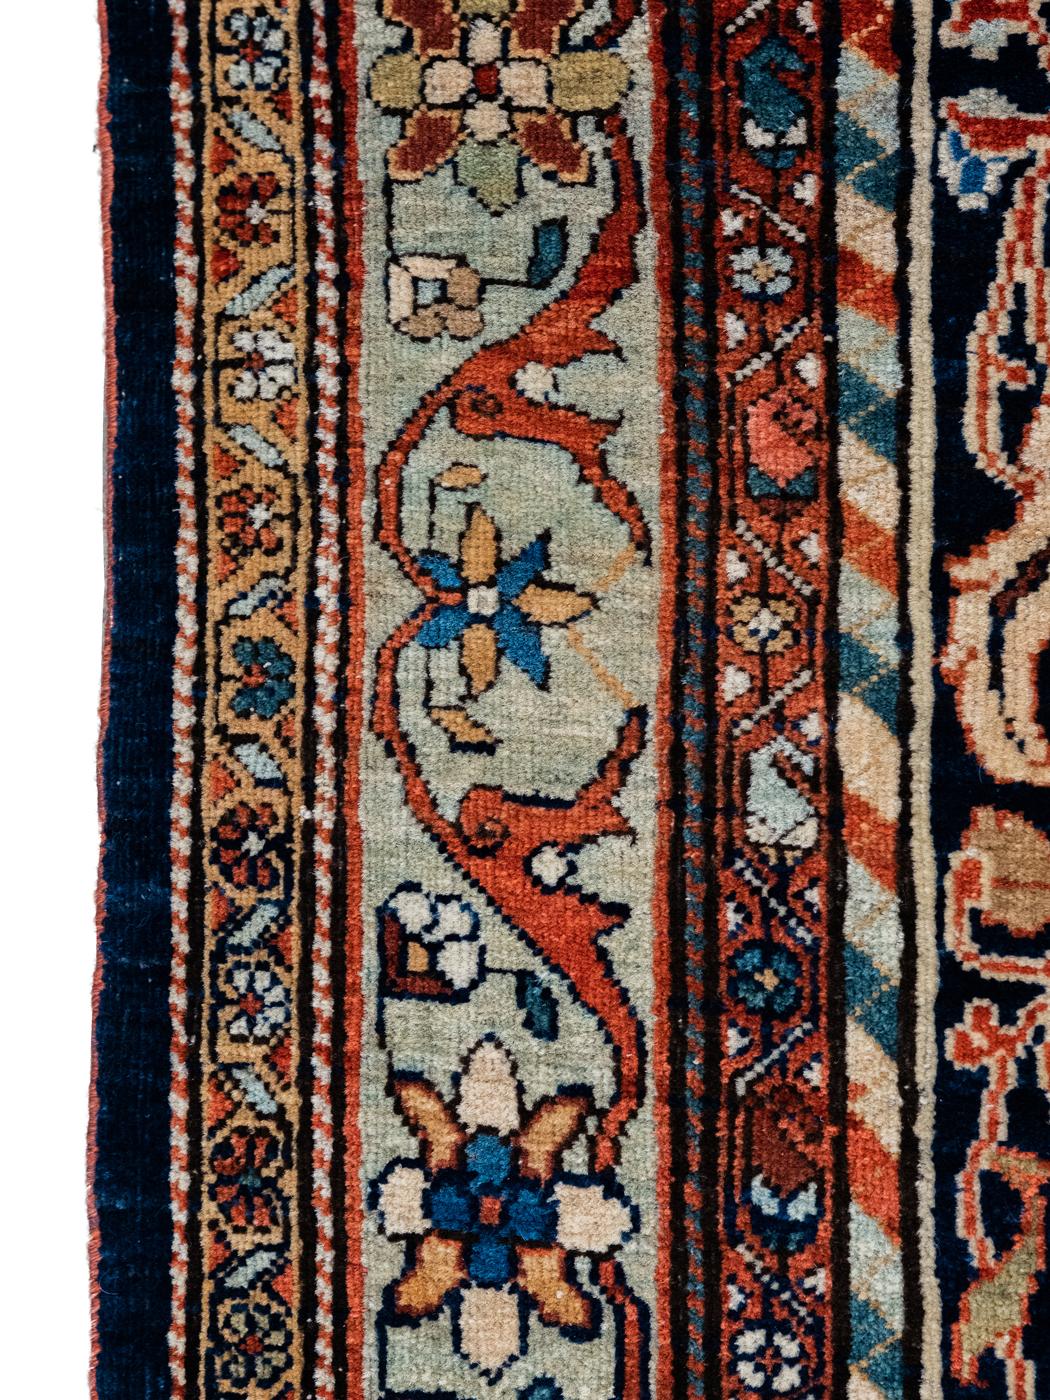 Late 19th Century Antique Wool Persian Farahan Carpet, Hand-Knotted, Red, Indigo, Cream, 12’ x 17’ For Sale